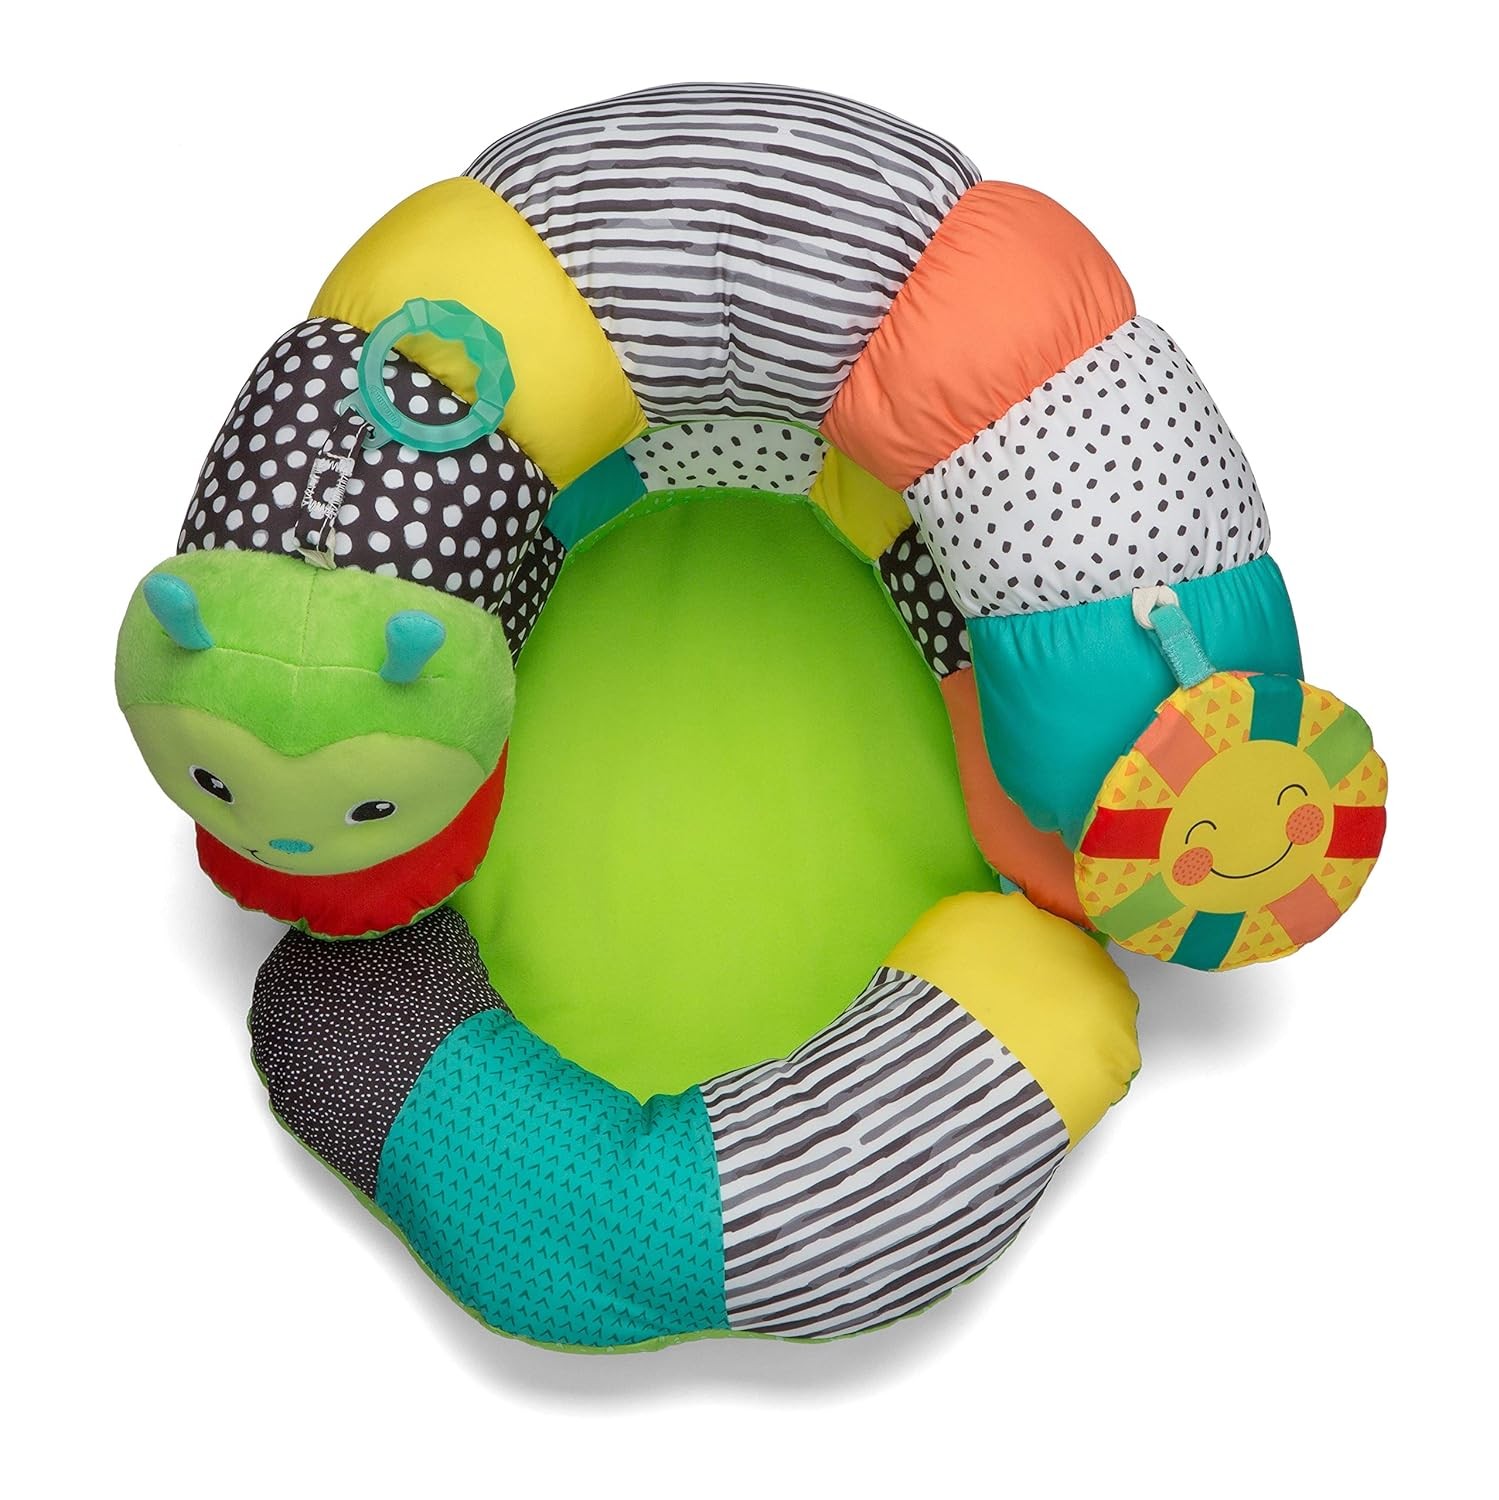 Infantino PROP-A-PILLAR TUMMY TIME & SEATED SUPPORT Floor Seat